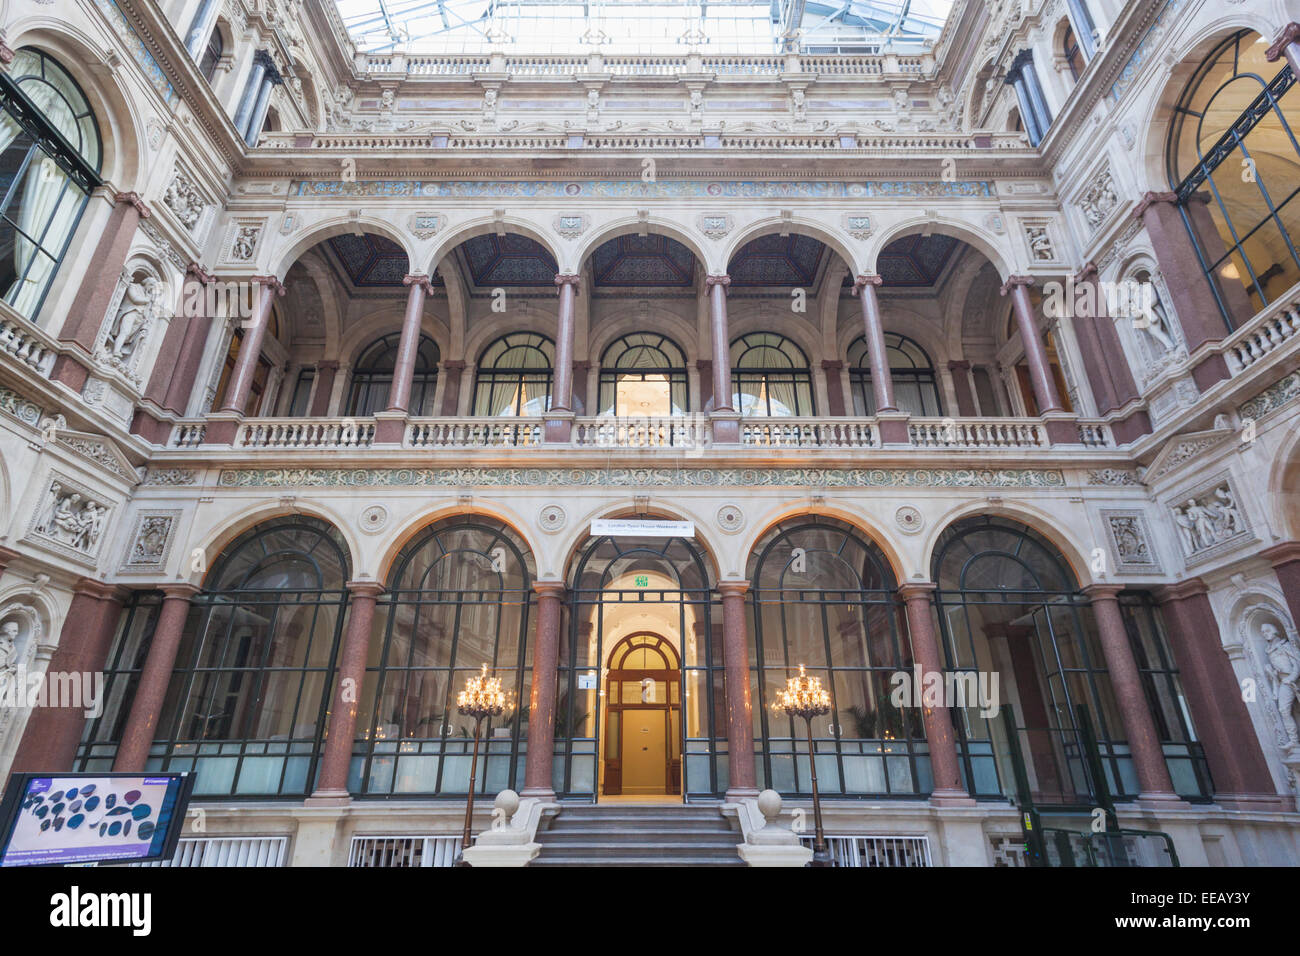 England, London, Whitehall, The Foreign Office, Interior Courtyard Stock Photo